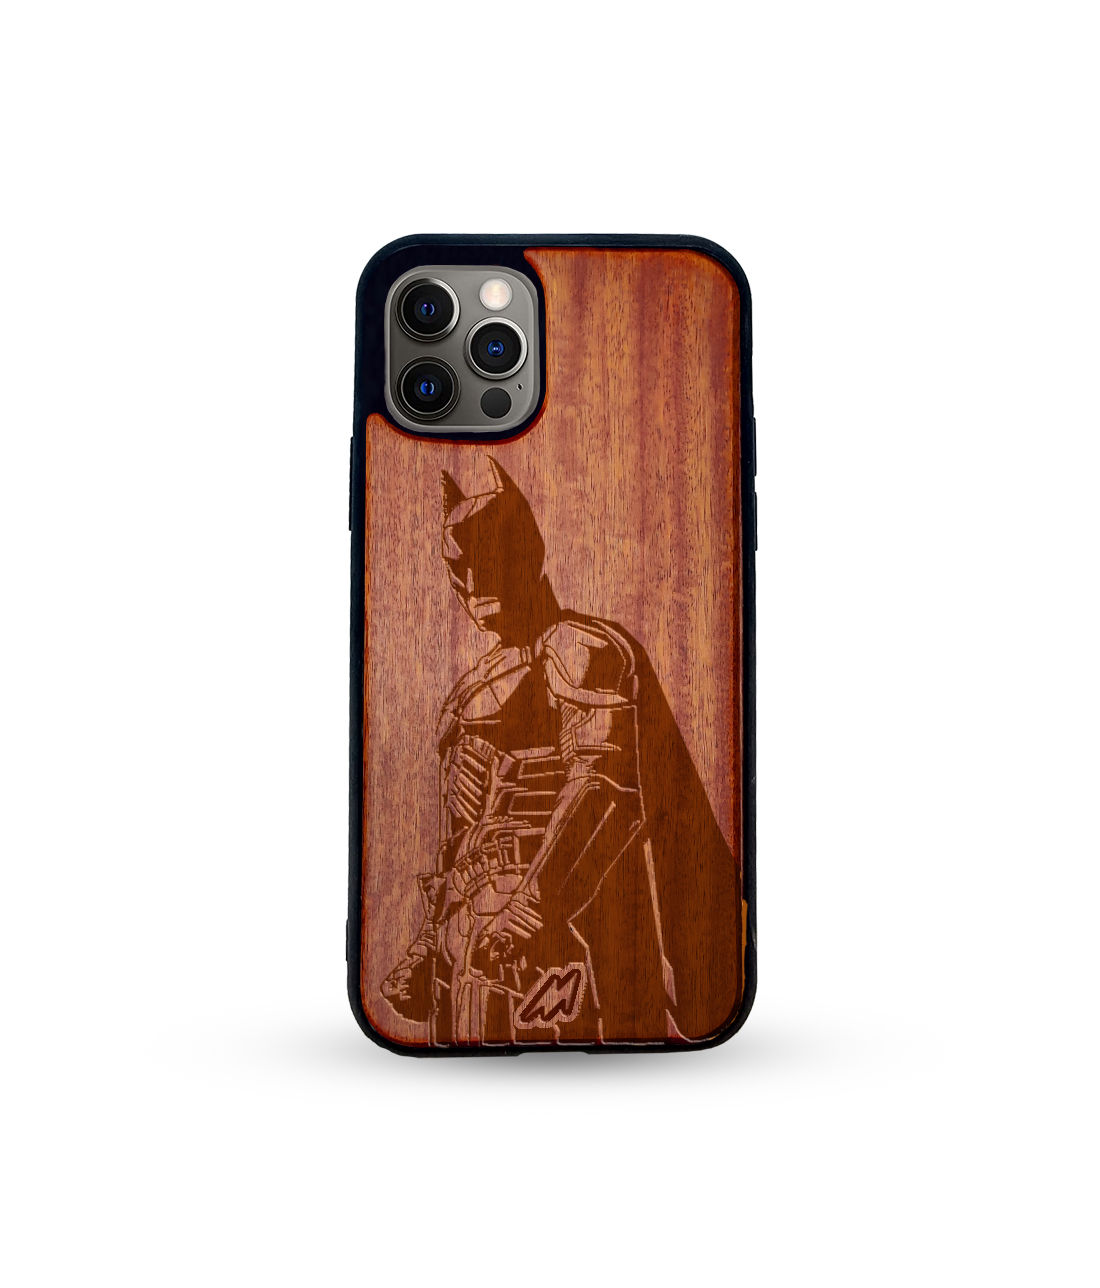 The Dark Knight Rises - Dark Shade Wooden Phone Case for iPhone 12 Pro